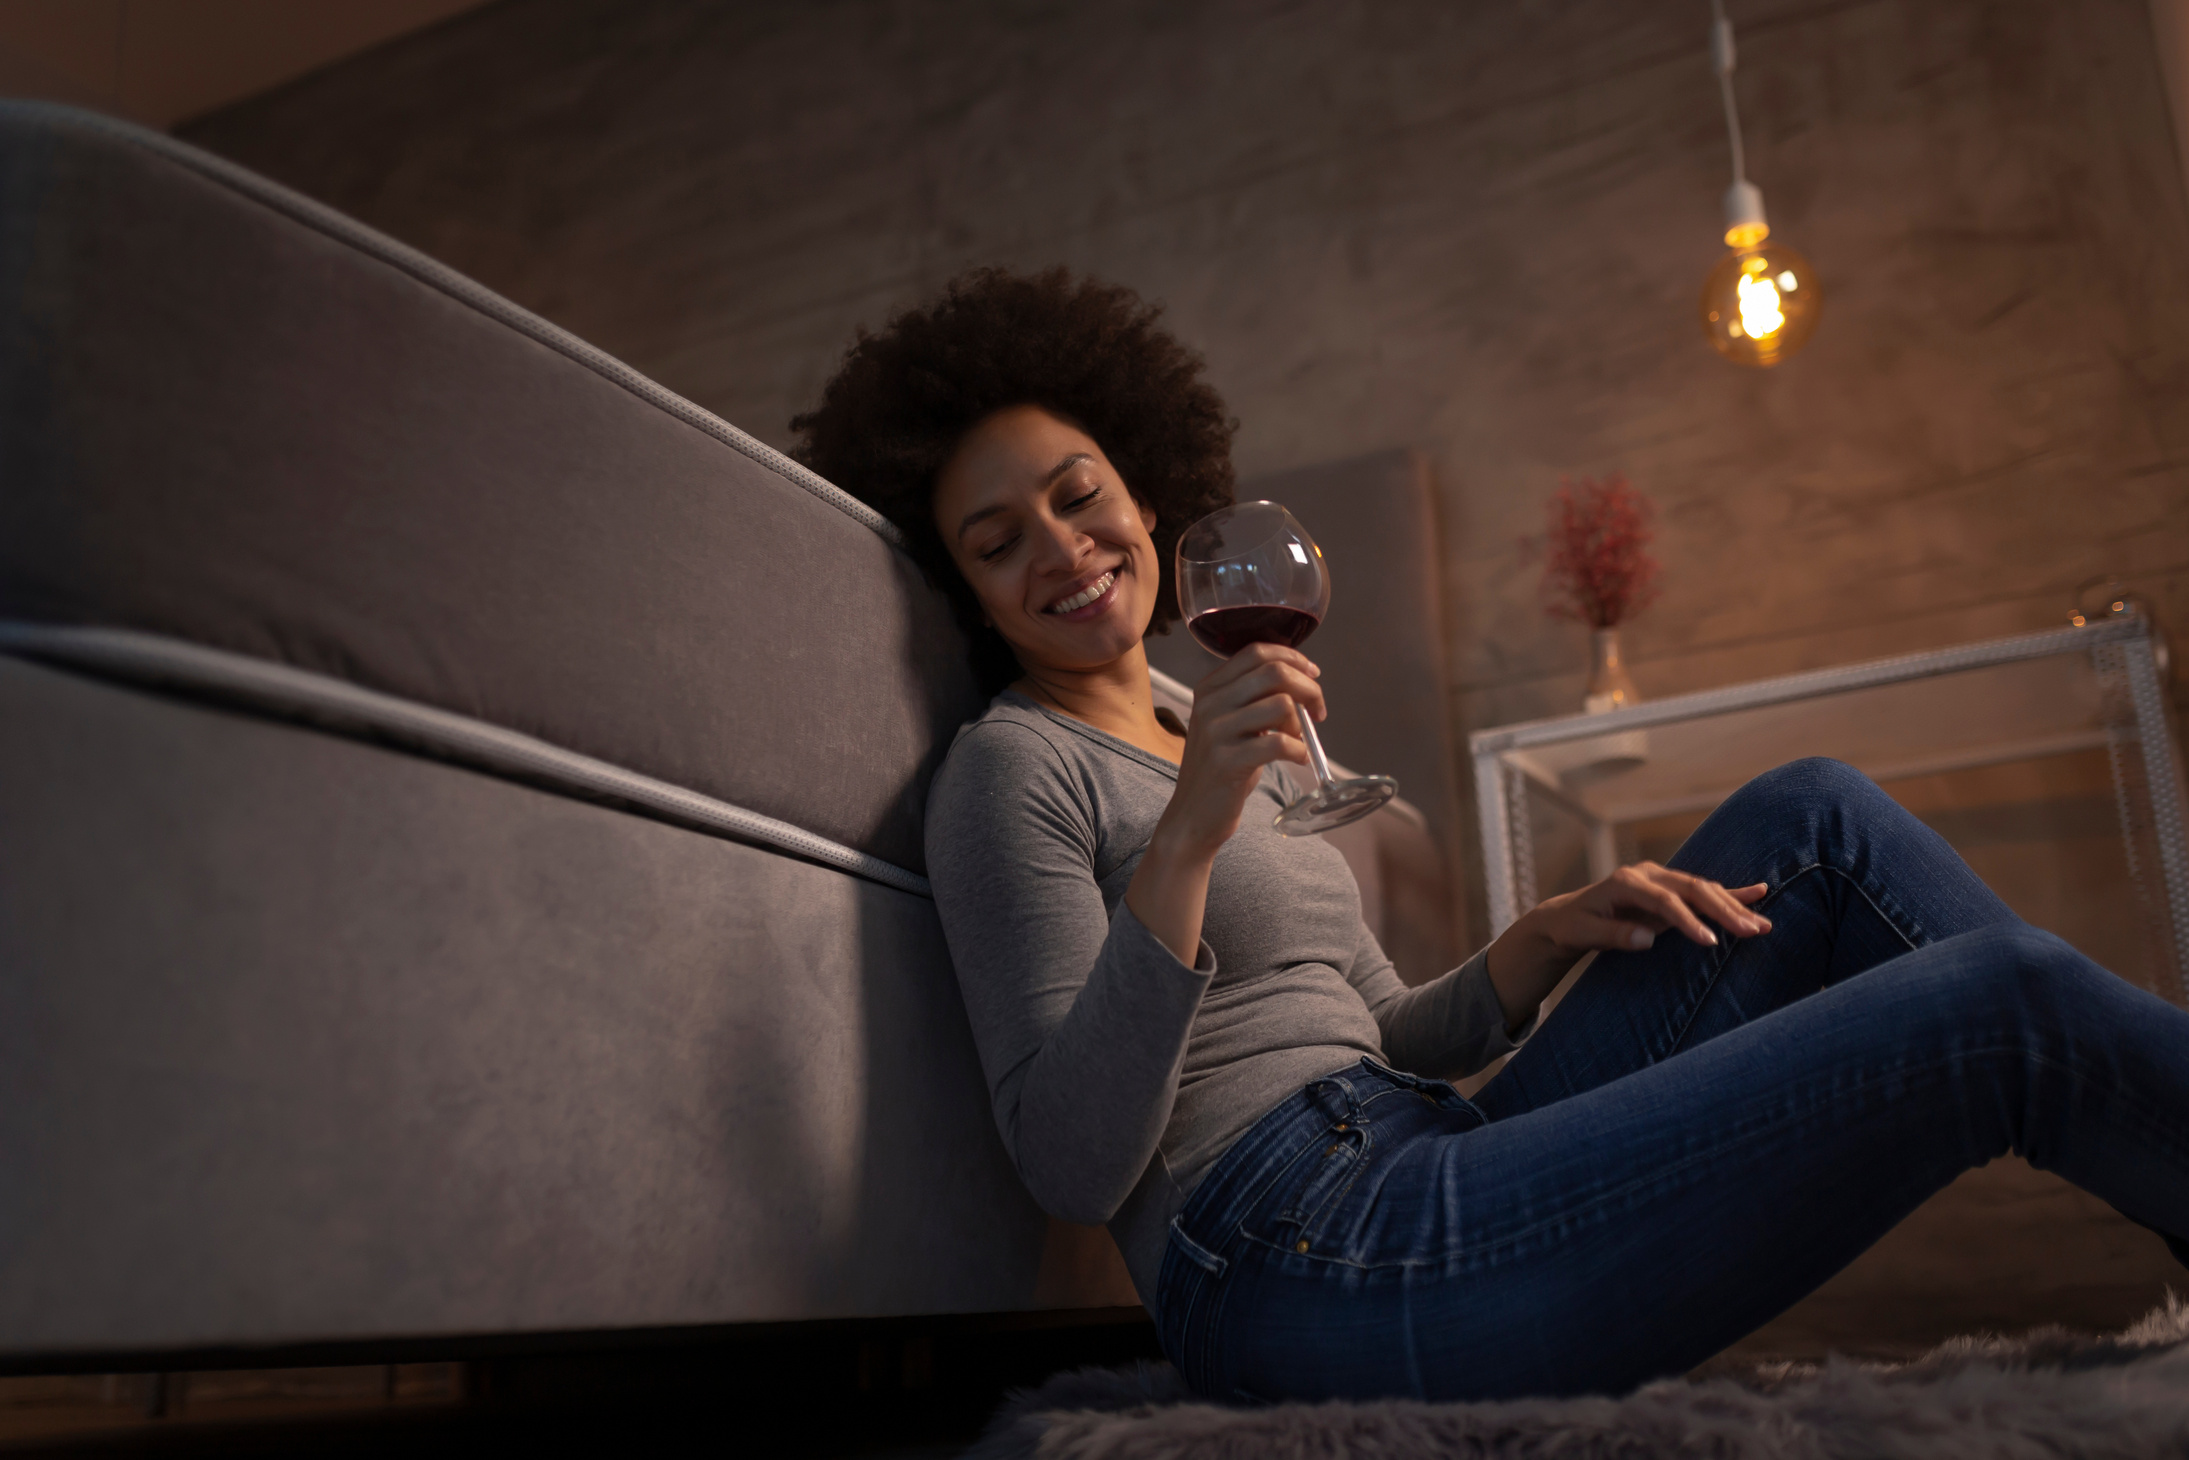 Woman drinking wine and relaxing